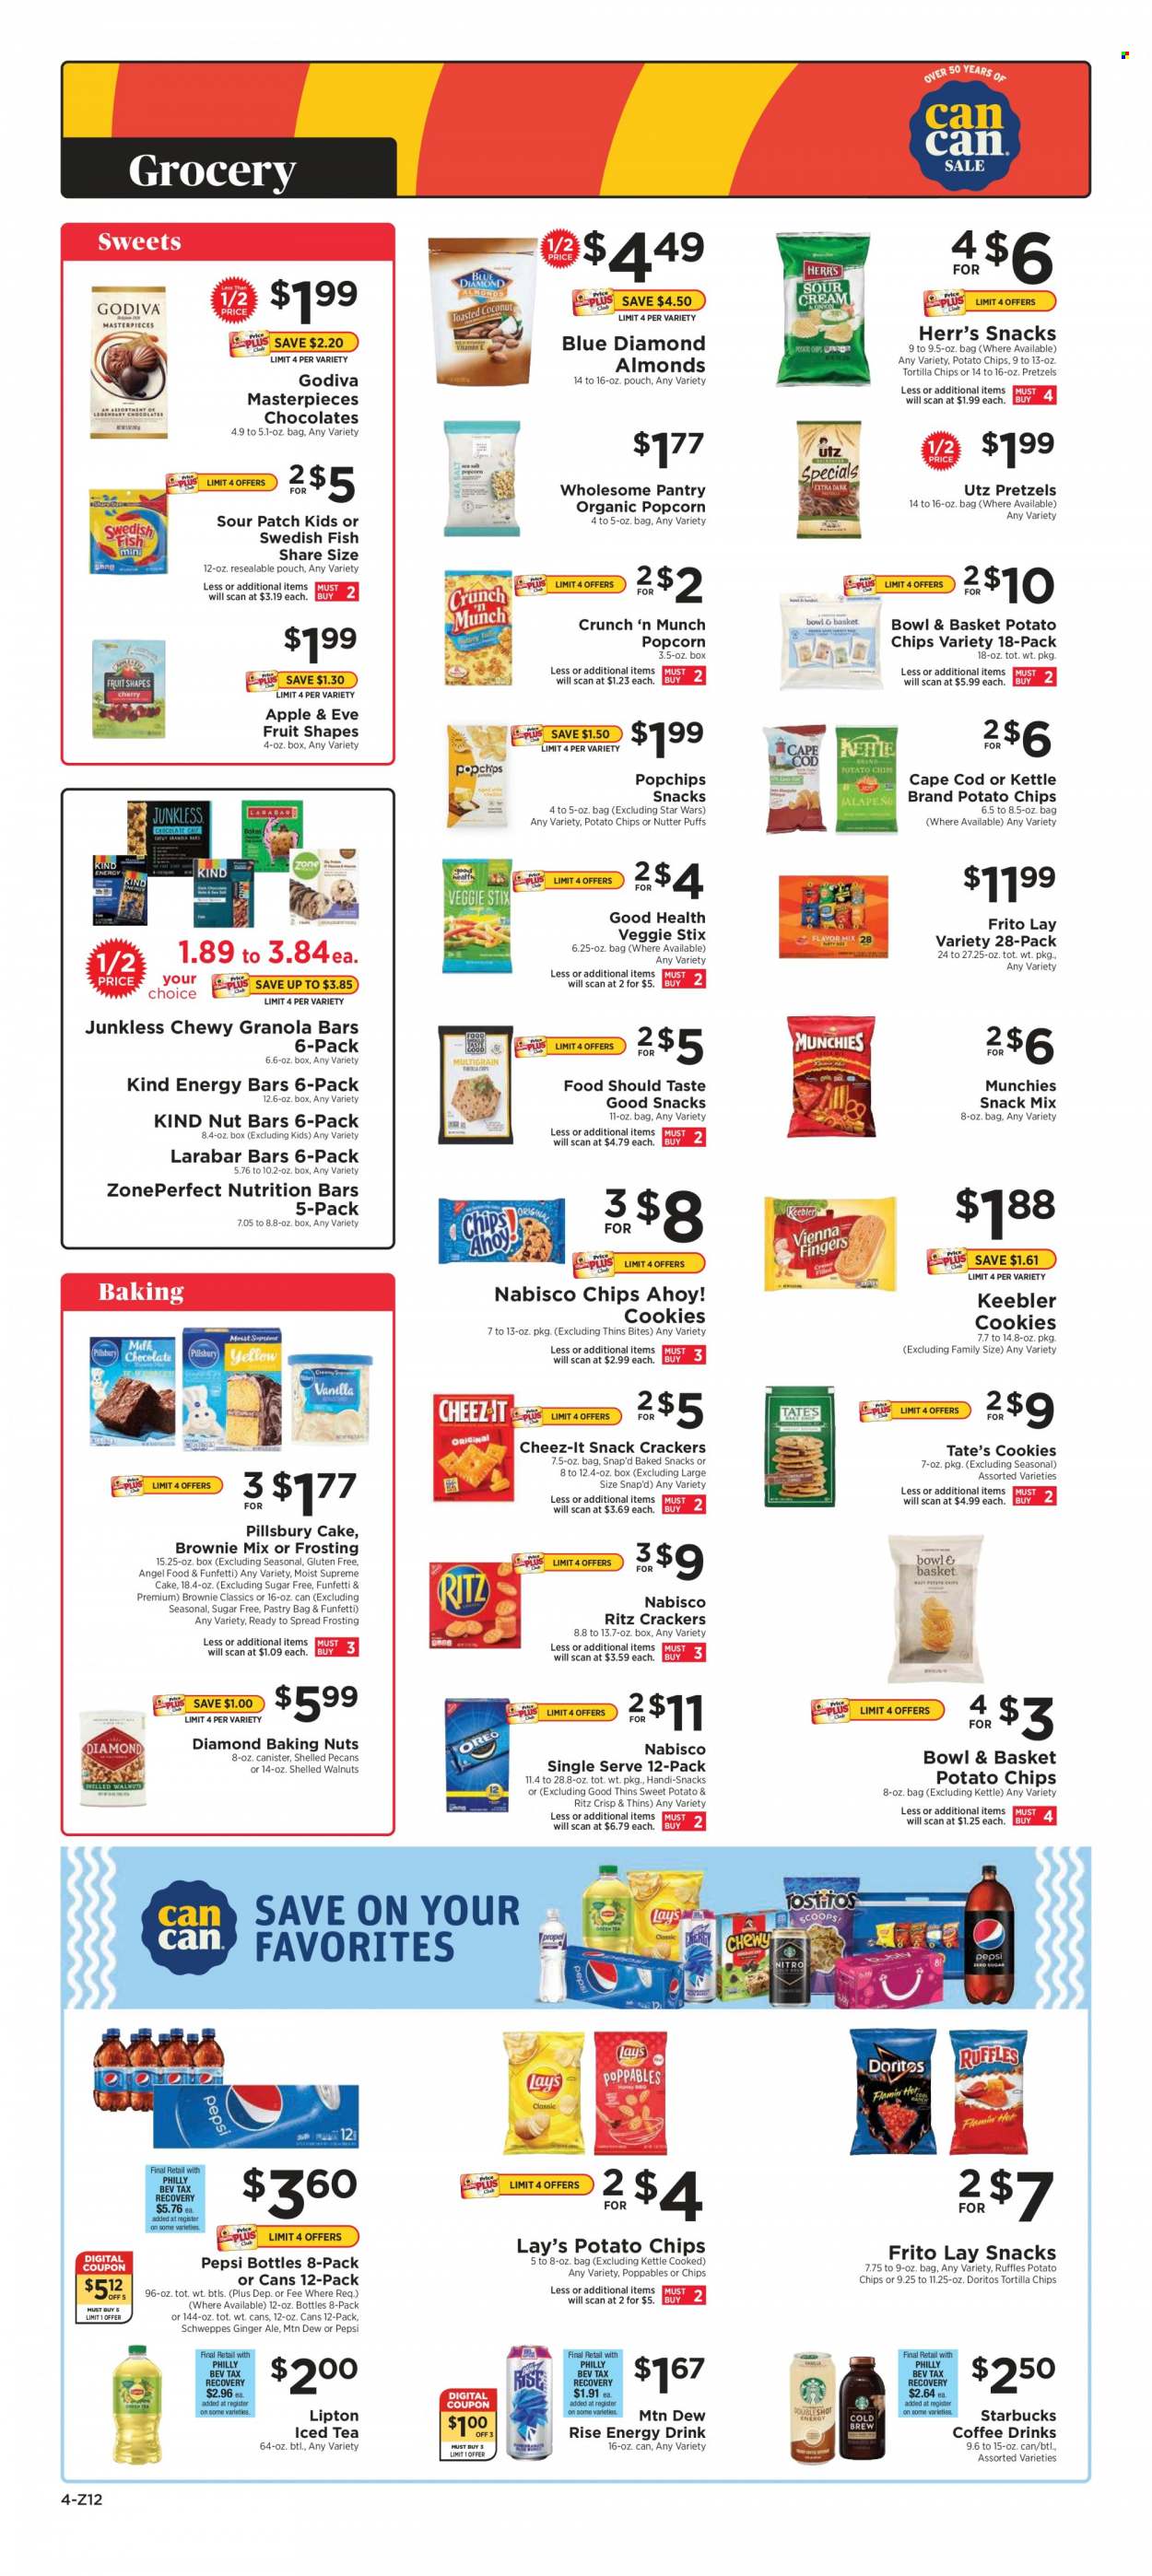 thumbnail - ShopRite Flyer - 01/09/2022 - 01/15/2022 - Sales products - pretzels, cake, Bowl & Basket, Angel Food, brownie mix, cod, Pillsbury, cookies, chocolate, snack, Godiva, crackers, Chips Ahoy!, Keebler, sour patch, RITZ, Doritos, tortilla chips, potato chips, chips, Lay’s, Thins, popcorn, Cheez-It, frosting, nutrition bar, nut bar, granola bar, energy bar, almonds, walnuts, pecans, Blue Diamond, ginger ale, Mountain Dew, Schweppes, Pepsi, energy drink, Lipton, ice tea, Starbucks. Page 4.